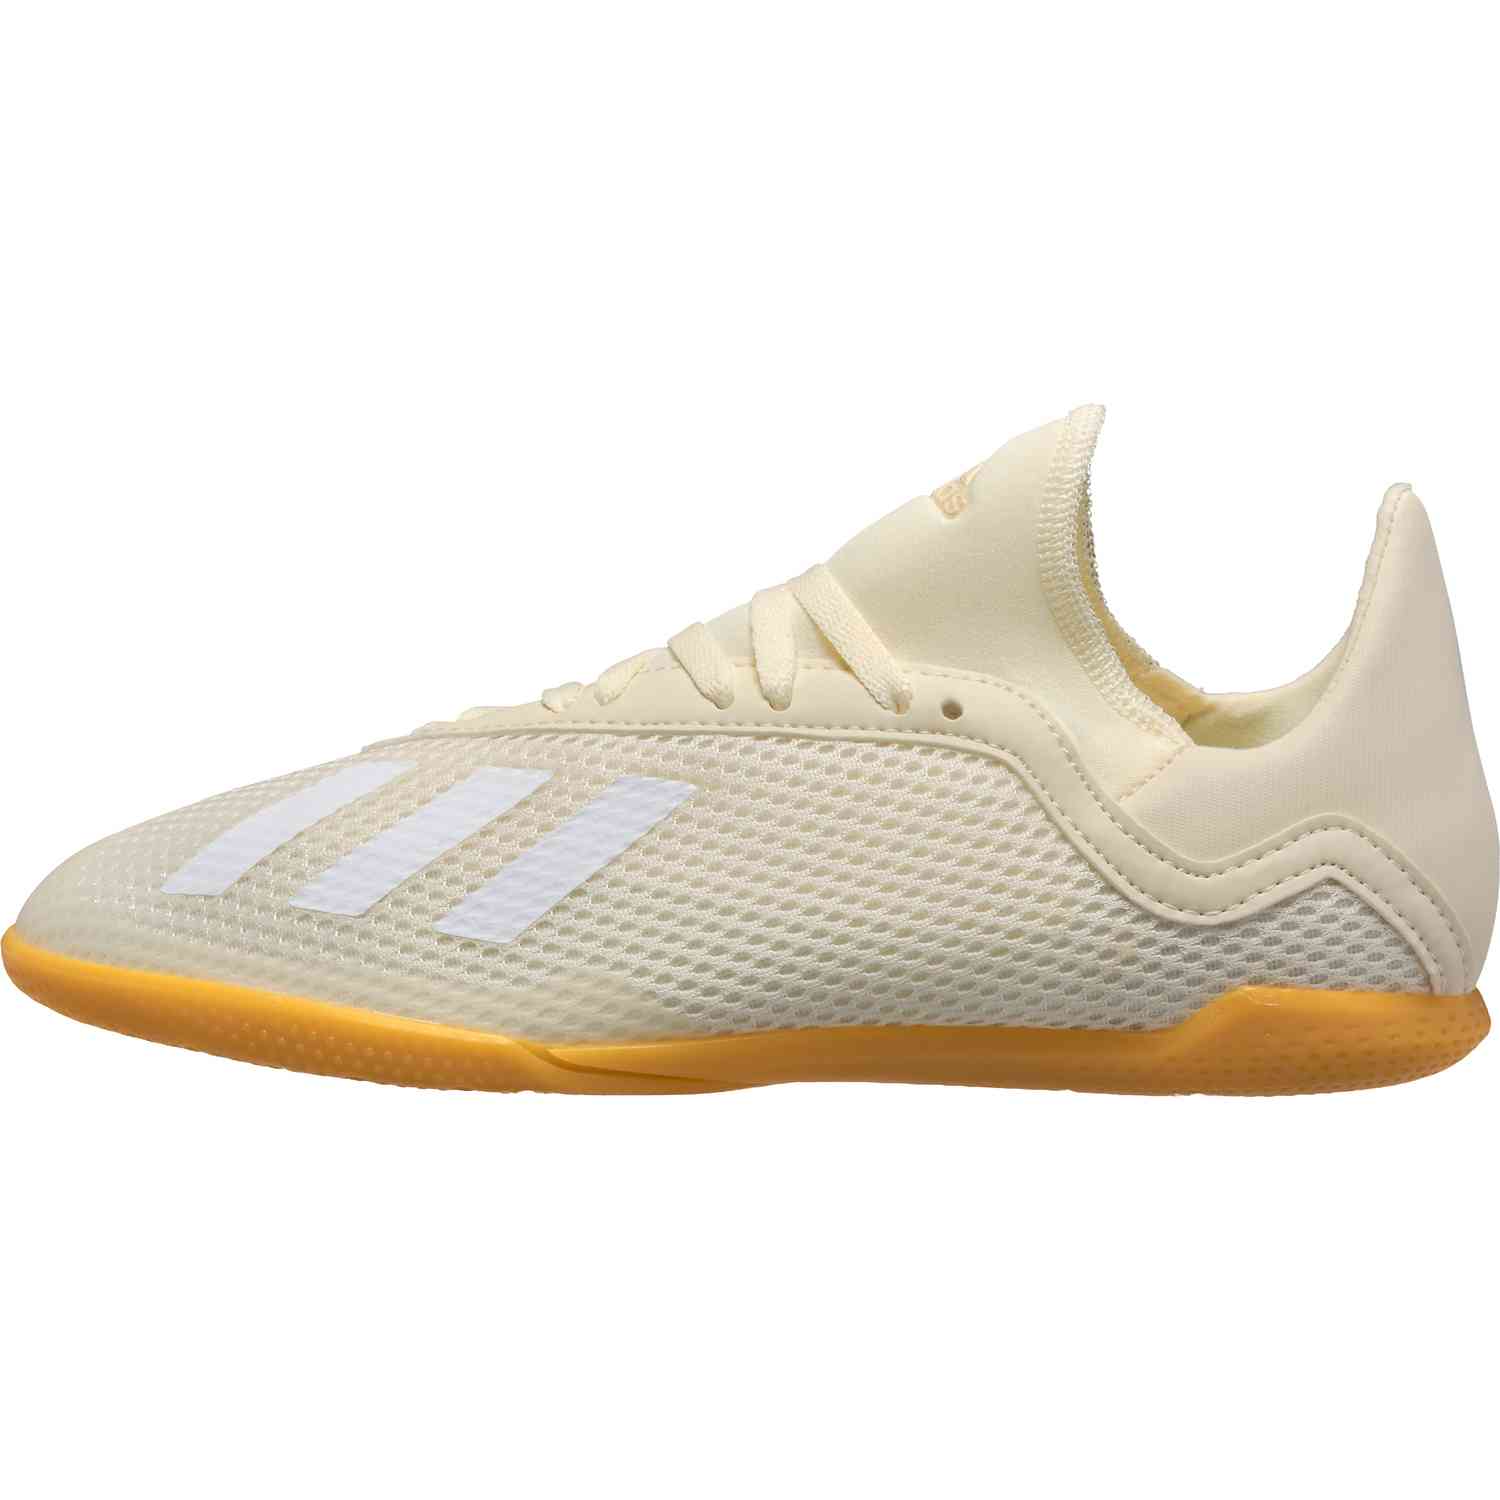 adidas x tango 18.3 in spectral mode